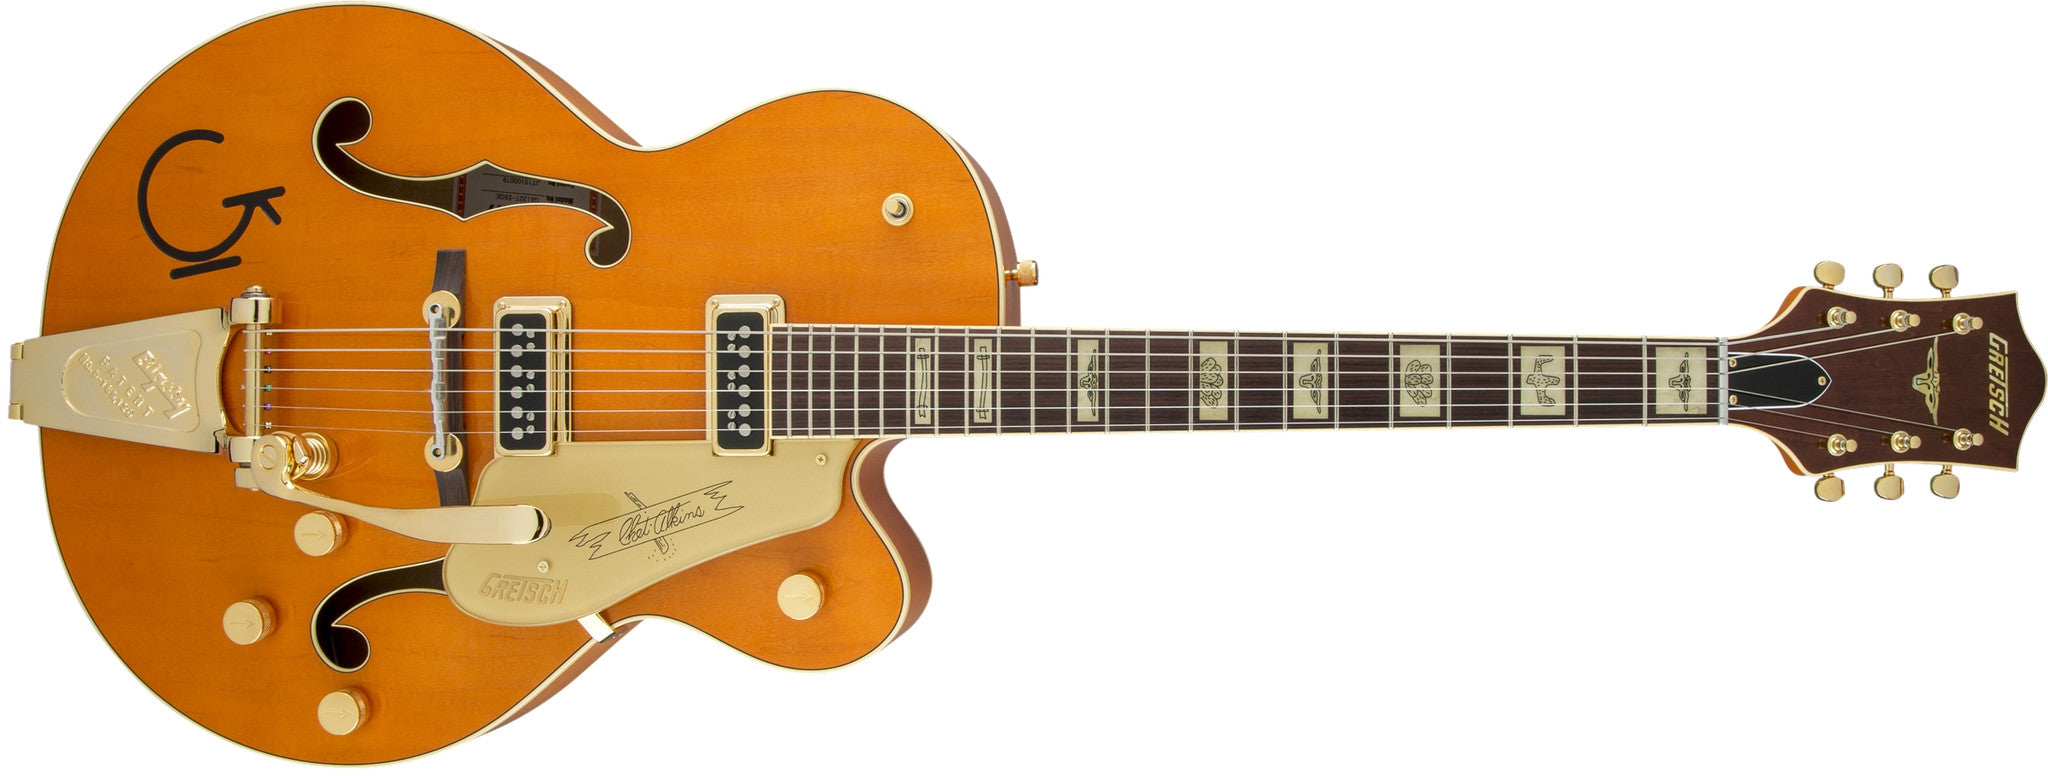 Gretsch G6120T-55GE Golden Era Edition 1955 Chet Atkins Hollow Body with Bigsby, TV Jones, Vintage Orange Stain, Lacquer 2401357822 - L.A. Music - Canada's Favourite Music Store!